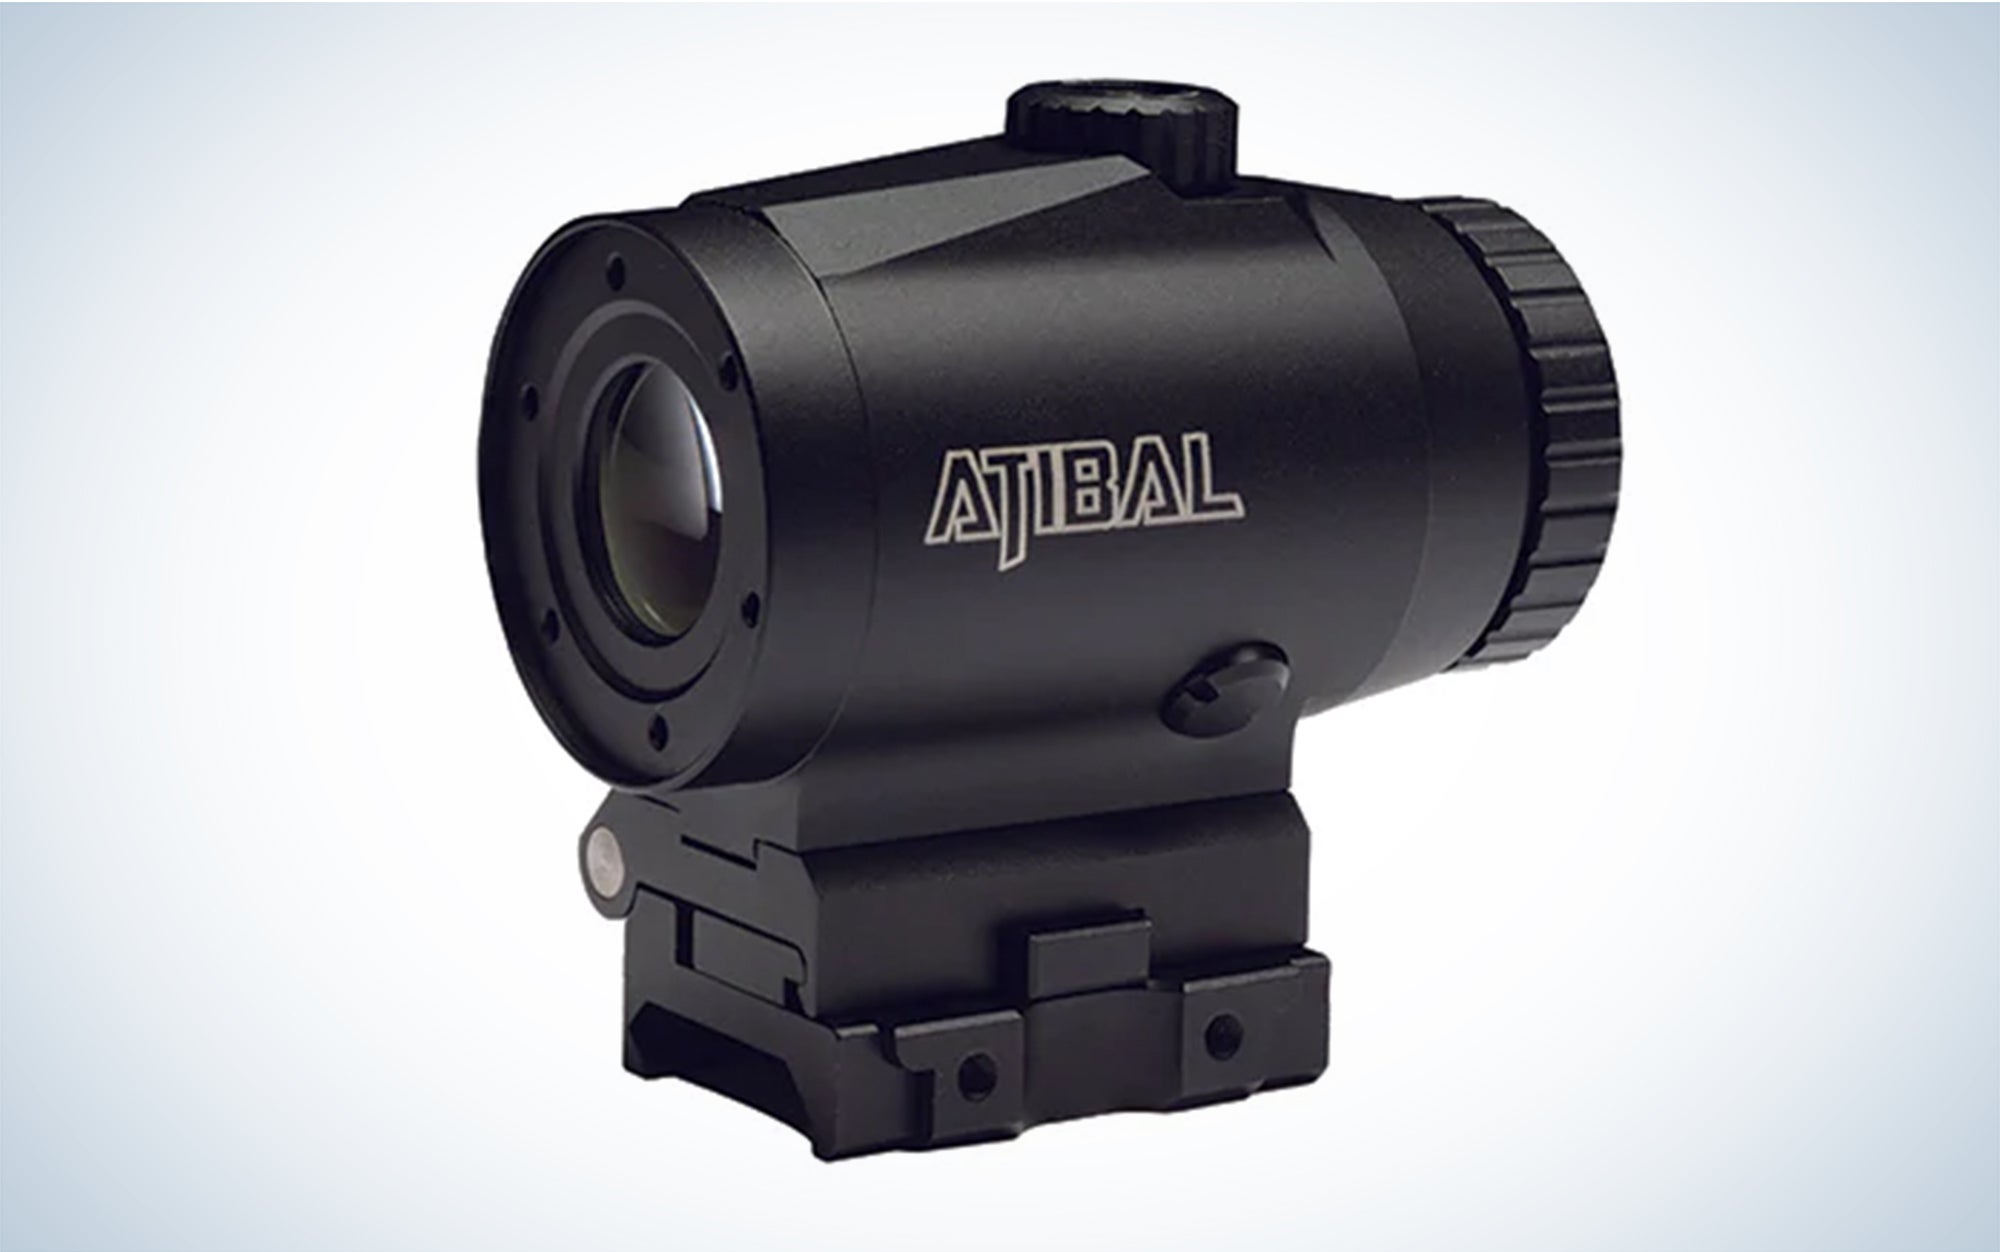 We tested the Atibal CM3 3x Compact (micro) Magnifier.